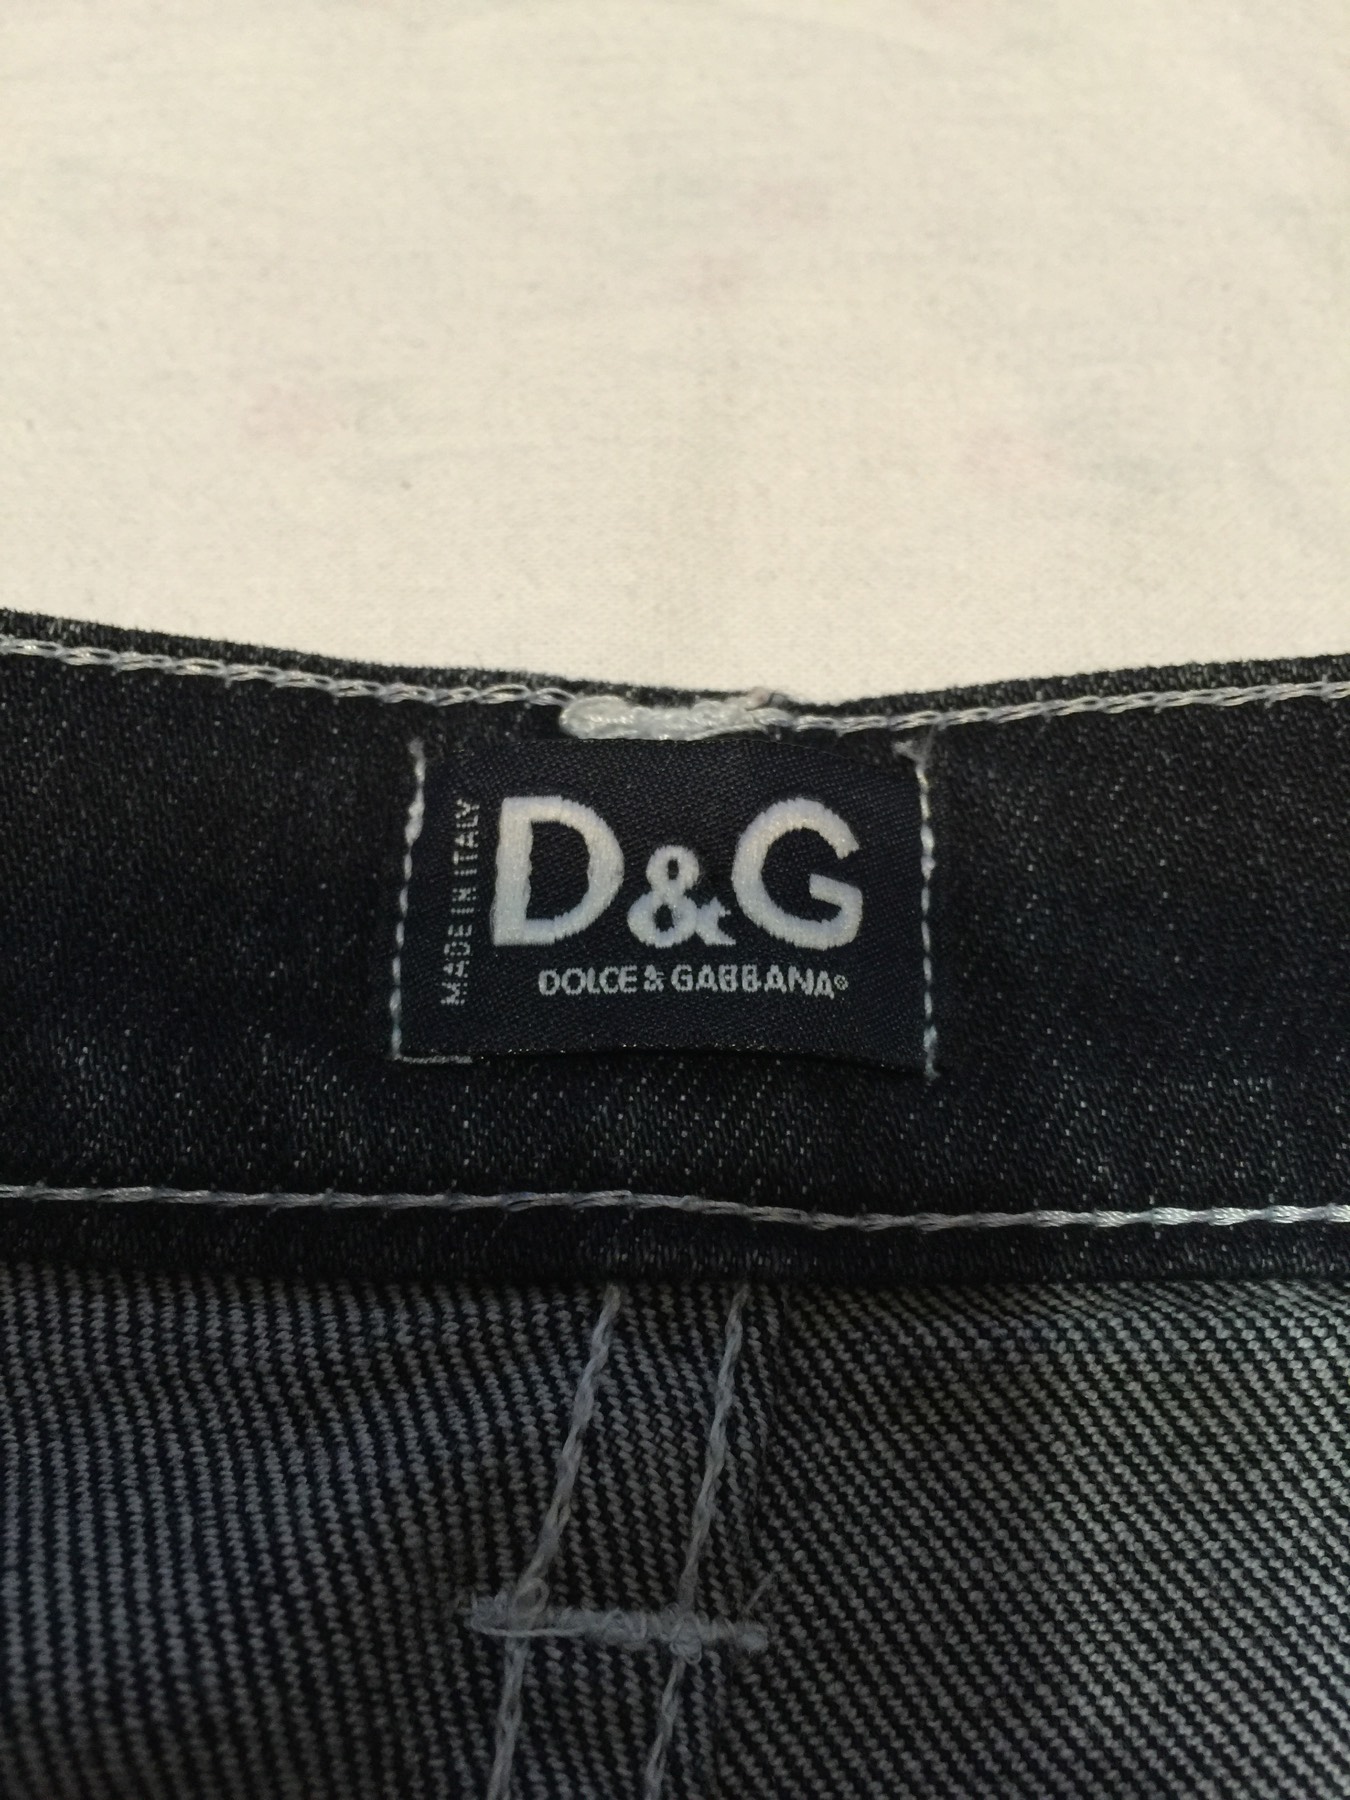 Can someone tell me if these D&G jeans are real? | Styleforum